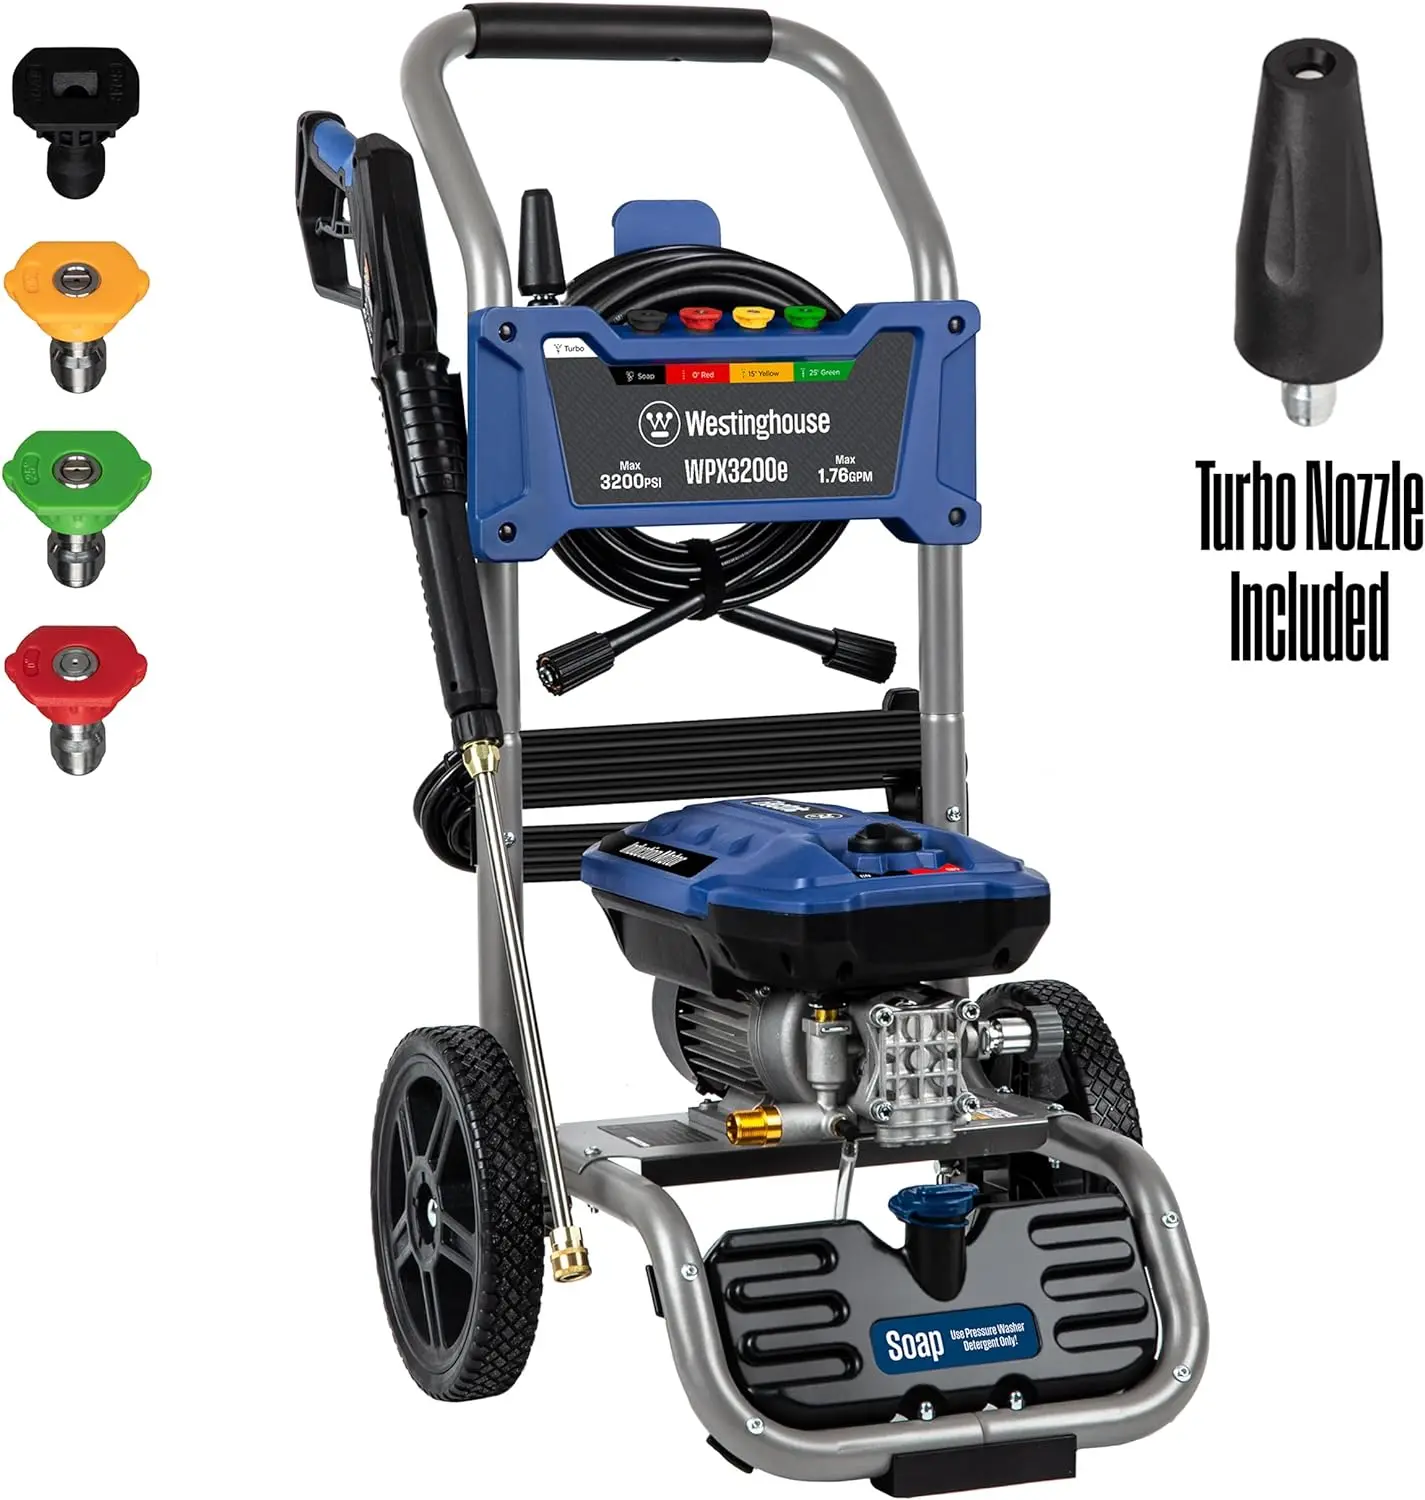 

Westinghouse WPX3200e Electric Pressure Washer, 3200 PSI and 1.76 Max GPM, Induction Motor, Onboard Soap Tank,Spray Gun and Wand